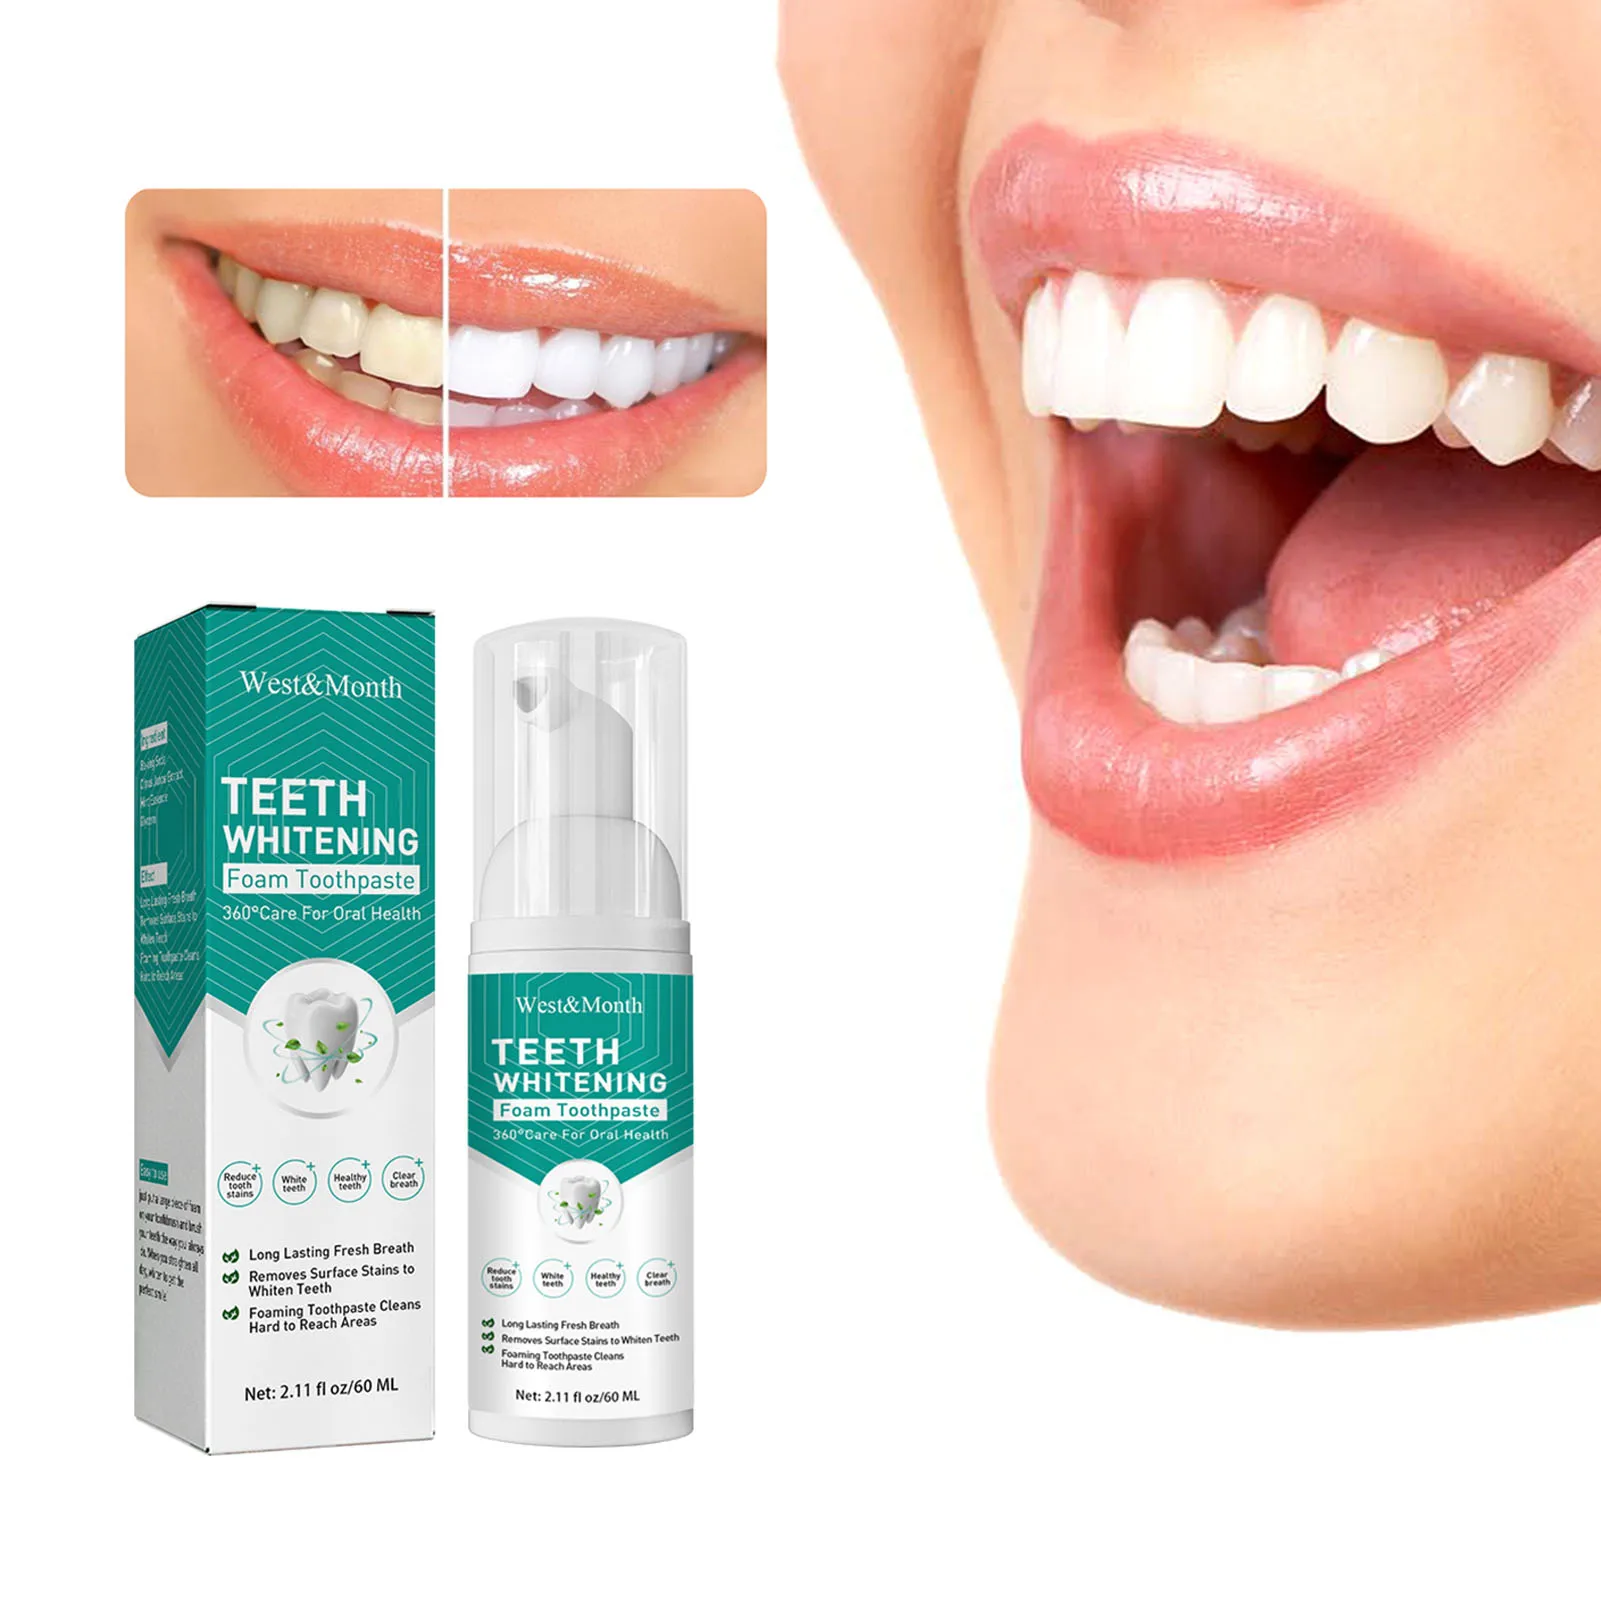 

60ml Teeth Whitening Foam Toothpaste Powerful Whitening Without Sensitivity Safe And Effective On Oral Health Original Formula